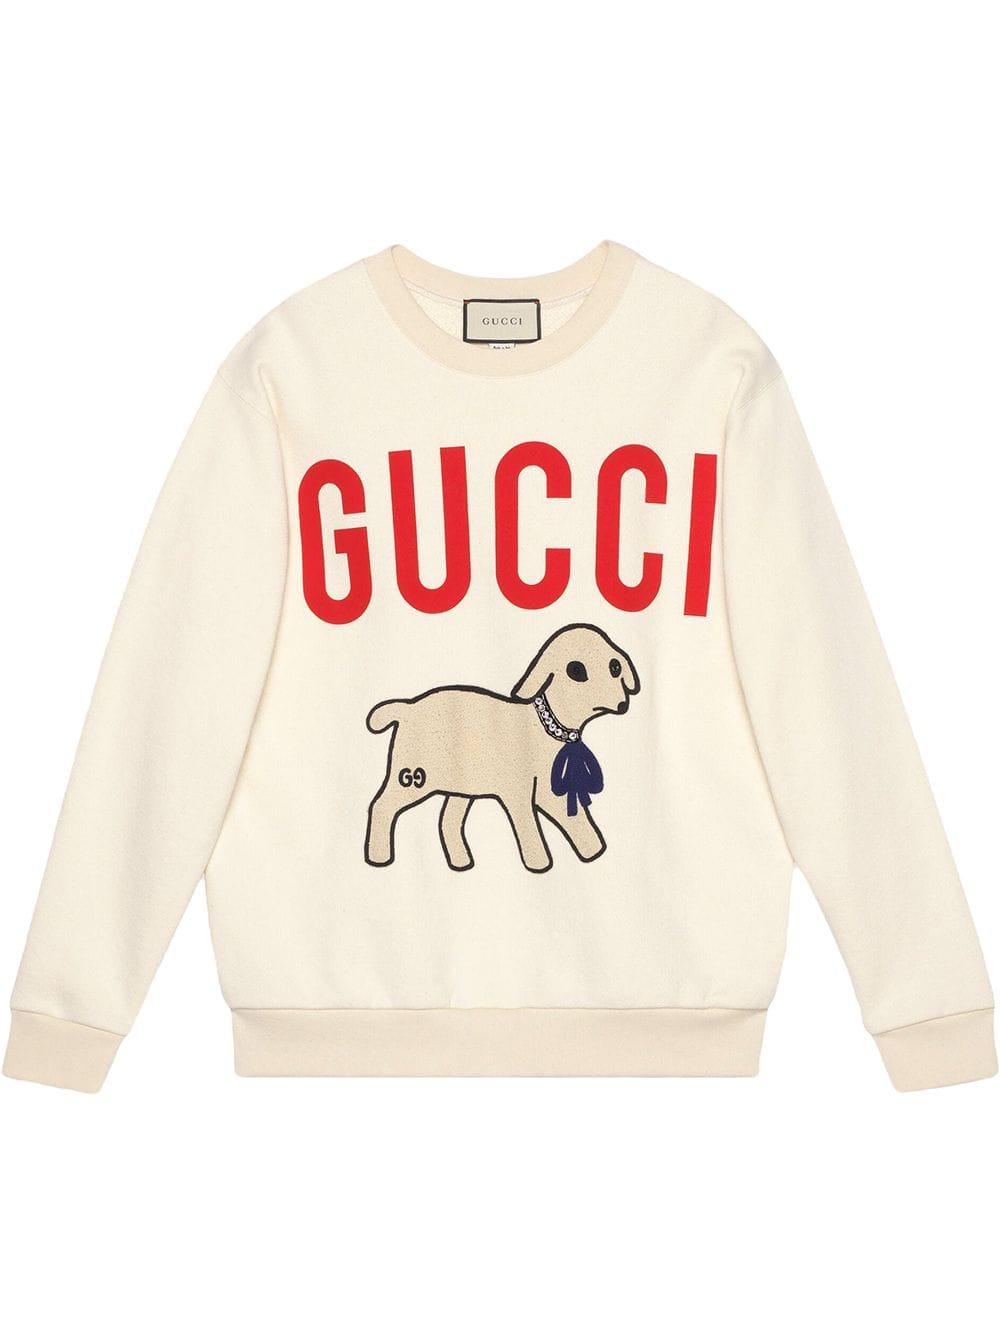 Gucci Cotton Lamb Patch Oversized Sweatshirt in White - Lyst